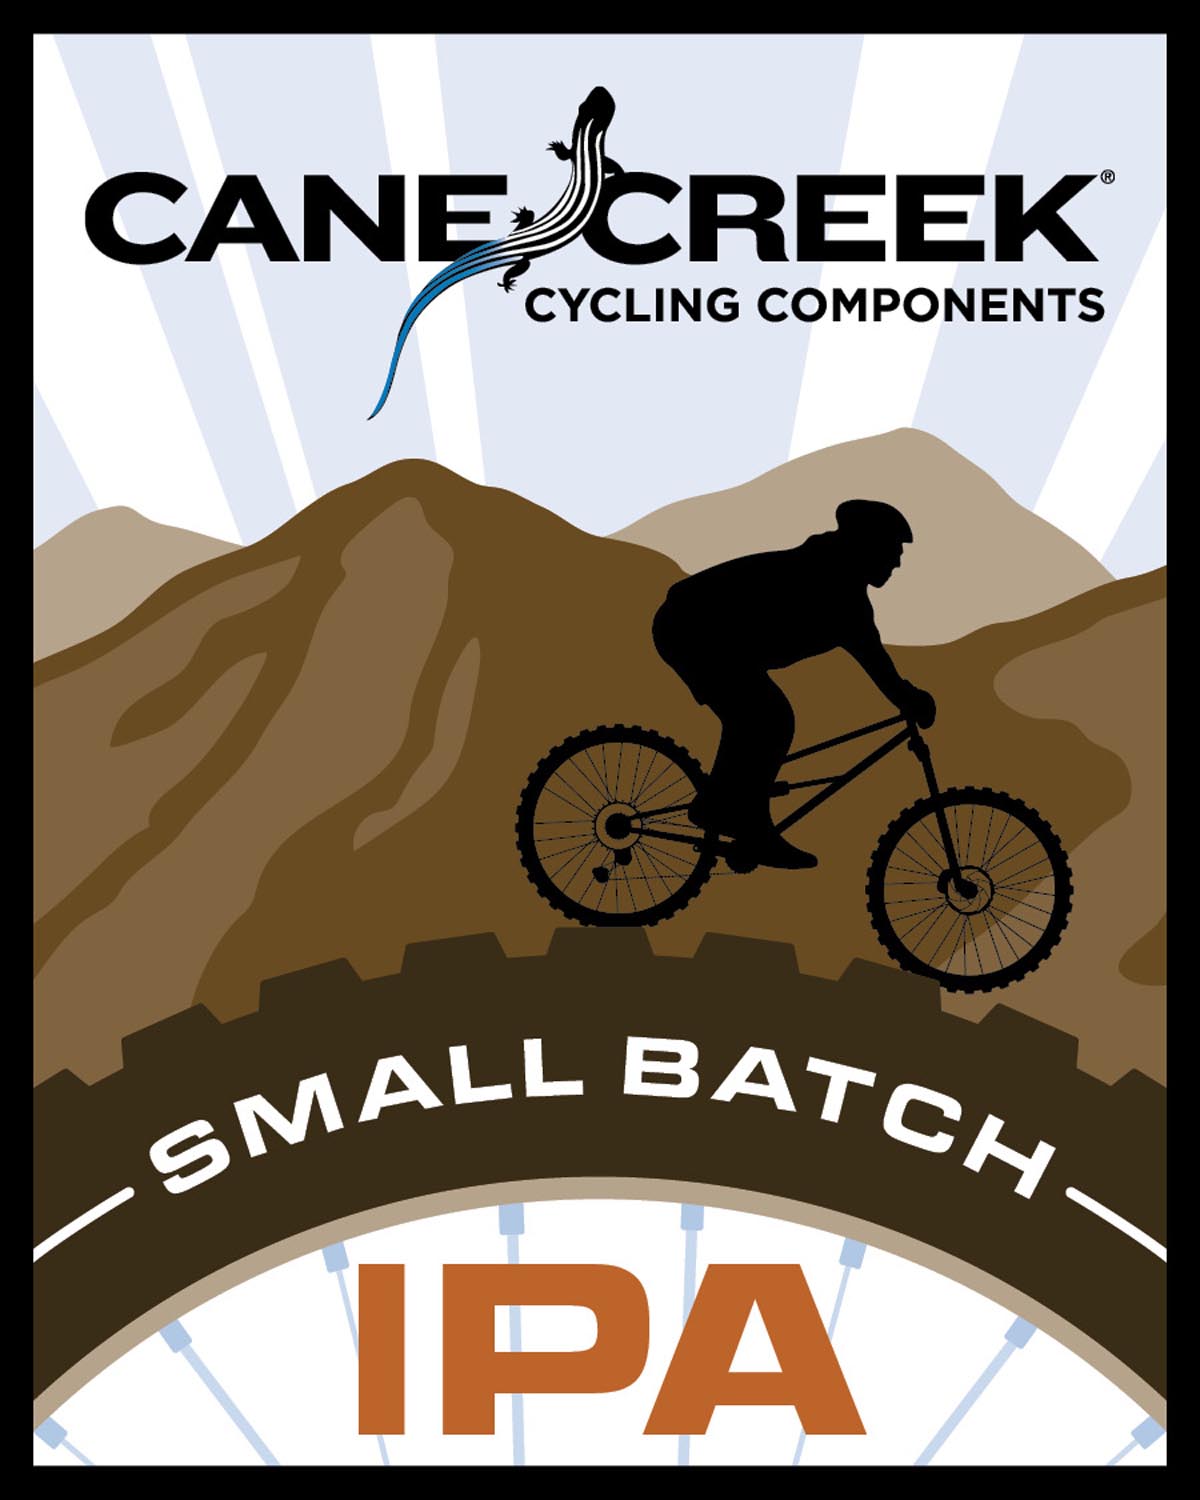 Cane Creek Small Batch IPA limited edition color poster